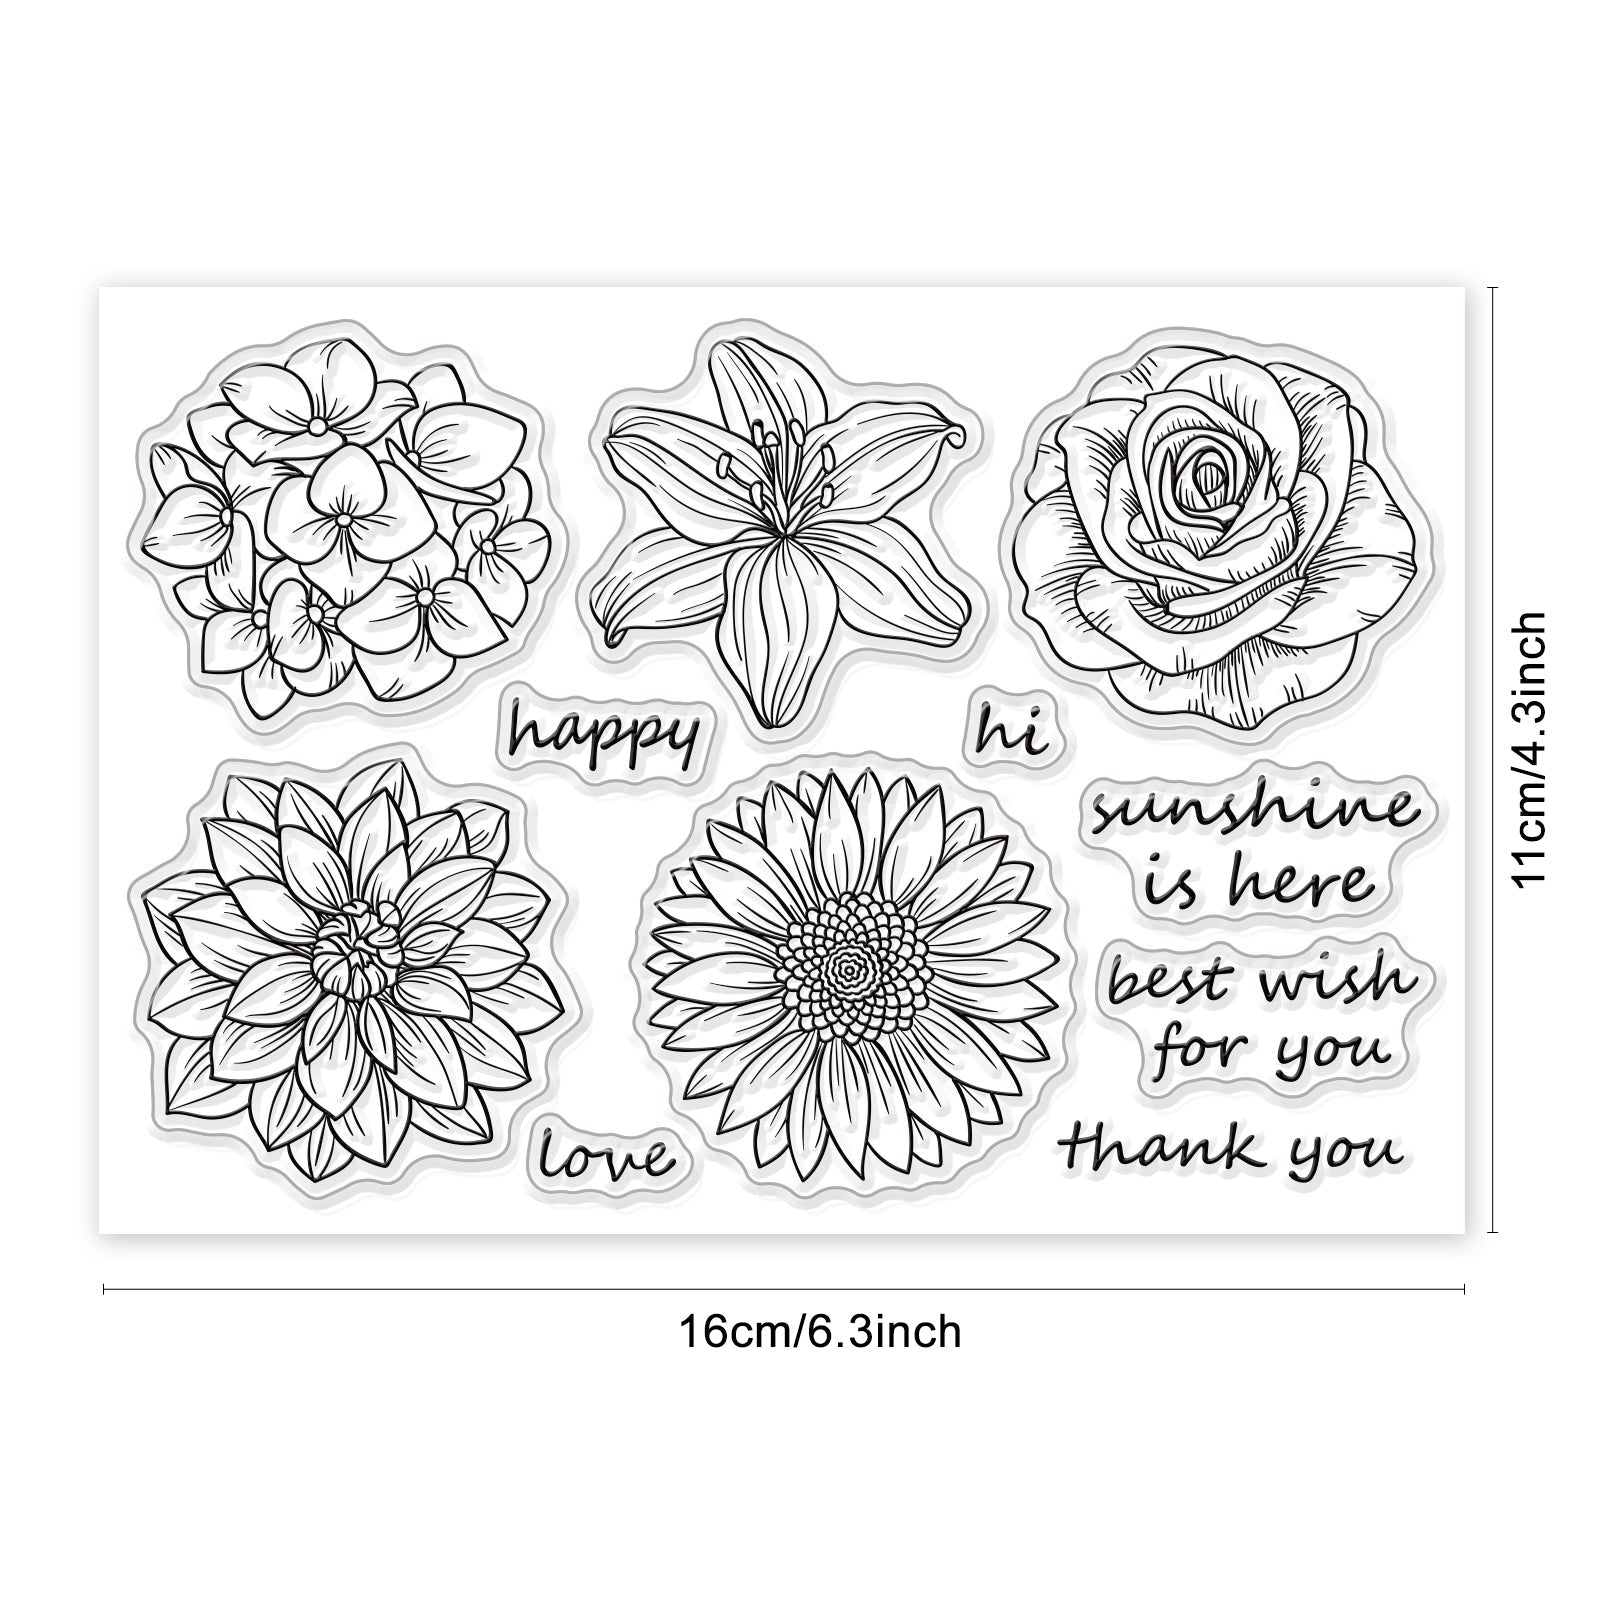 CRASPIRE Sunflowers, Dahlias, Hydrangeas, Lilies, Roses Clear Silicone Stamp Seal for Card Making Decoration and DIY Scrapbooking